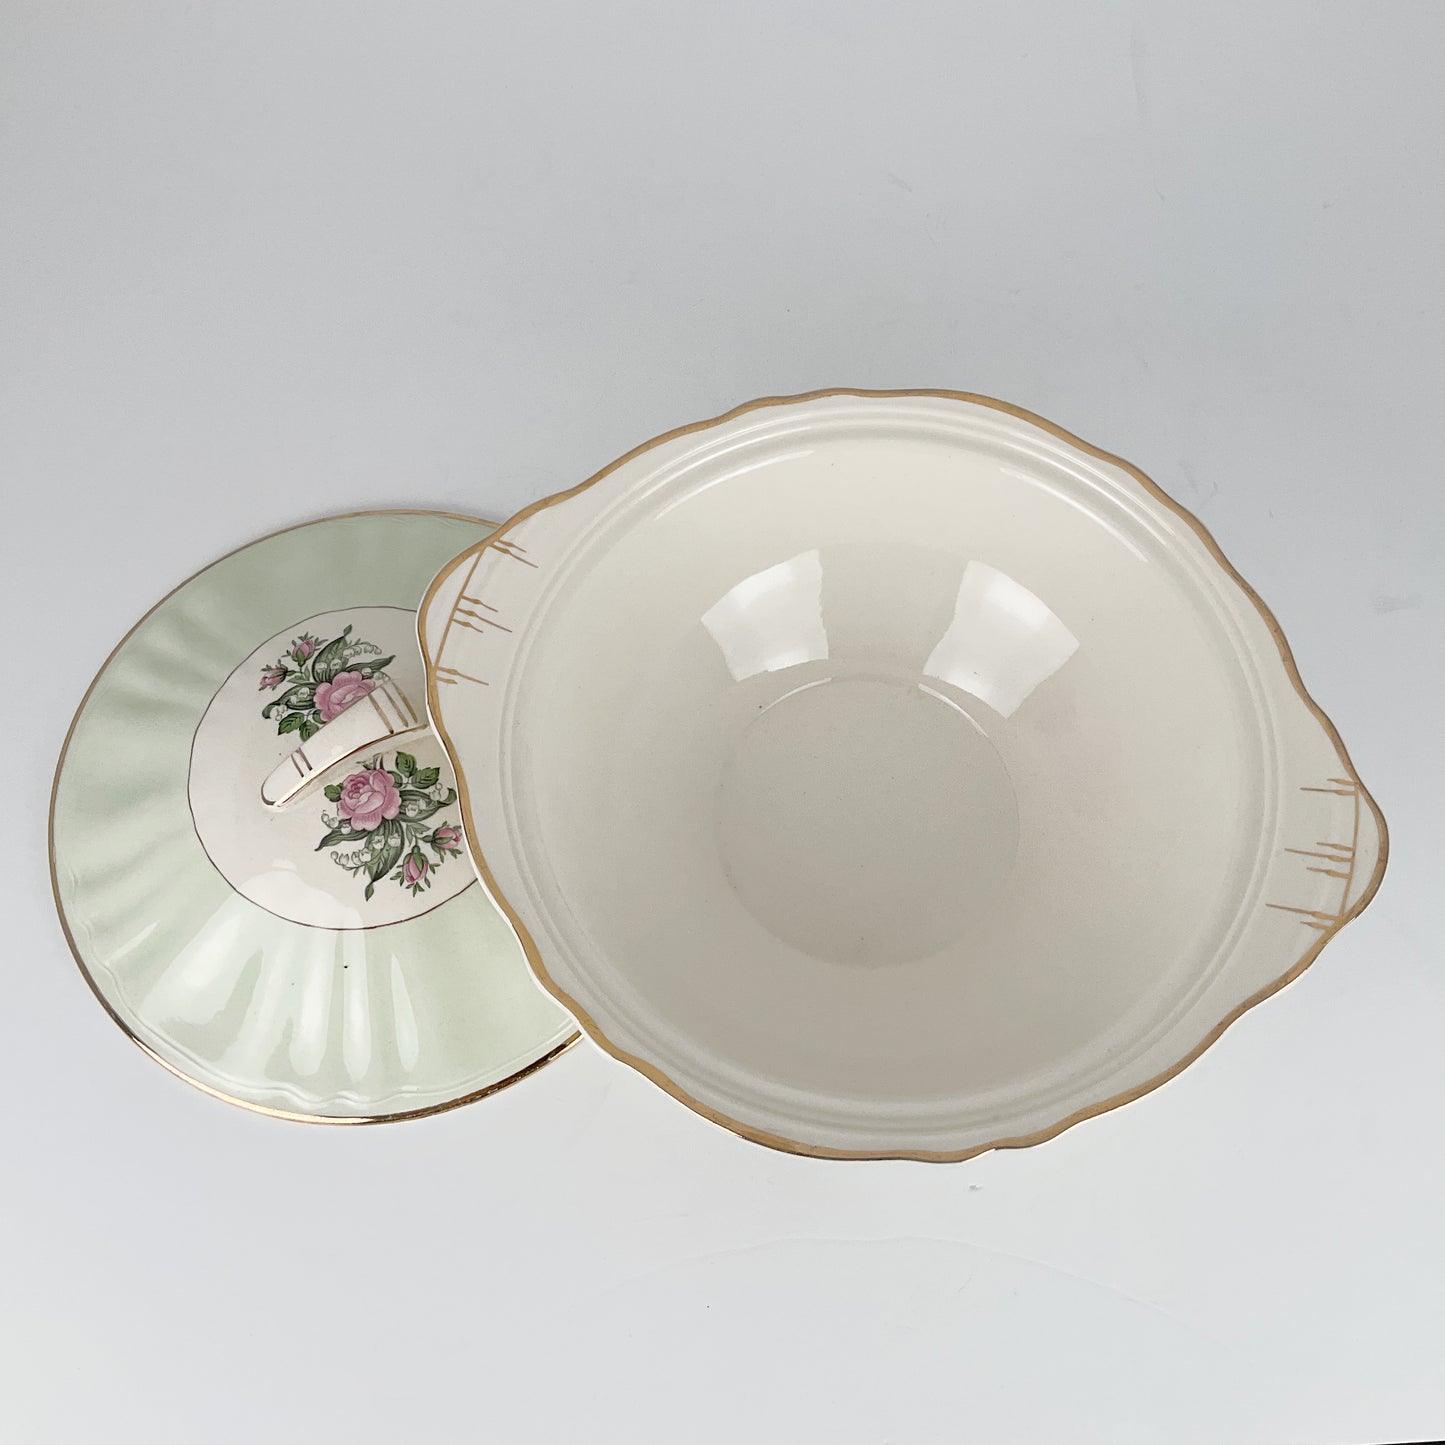 J&G Meakin - Serving Bowl with Lid